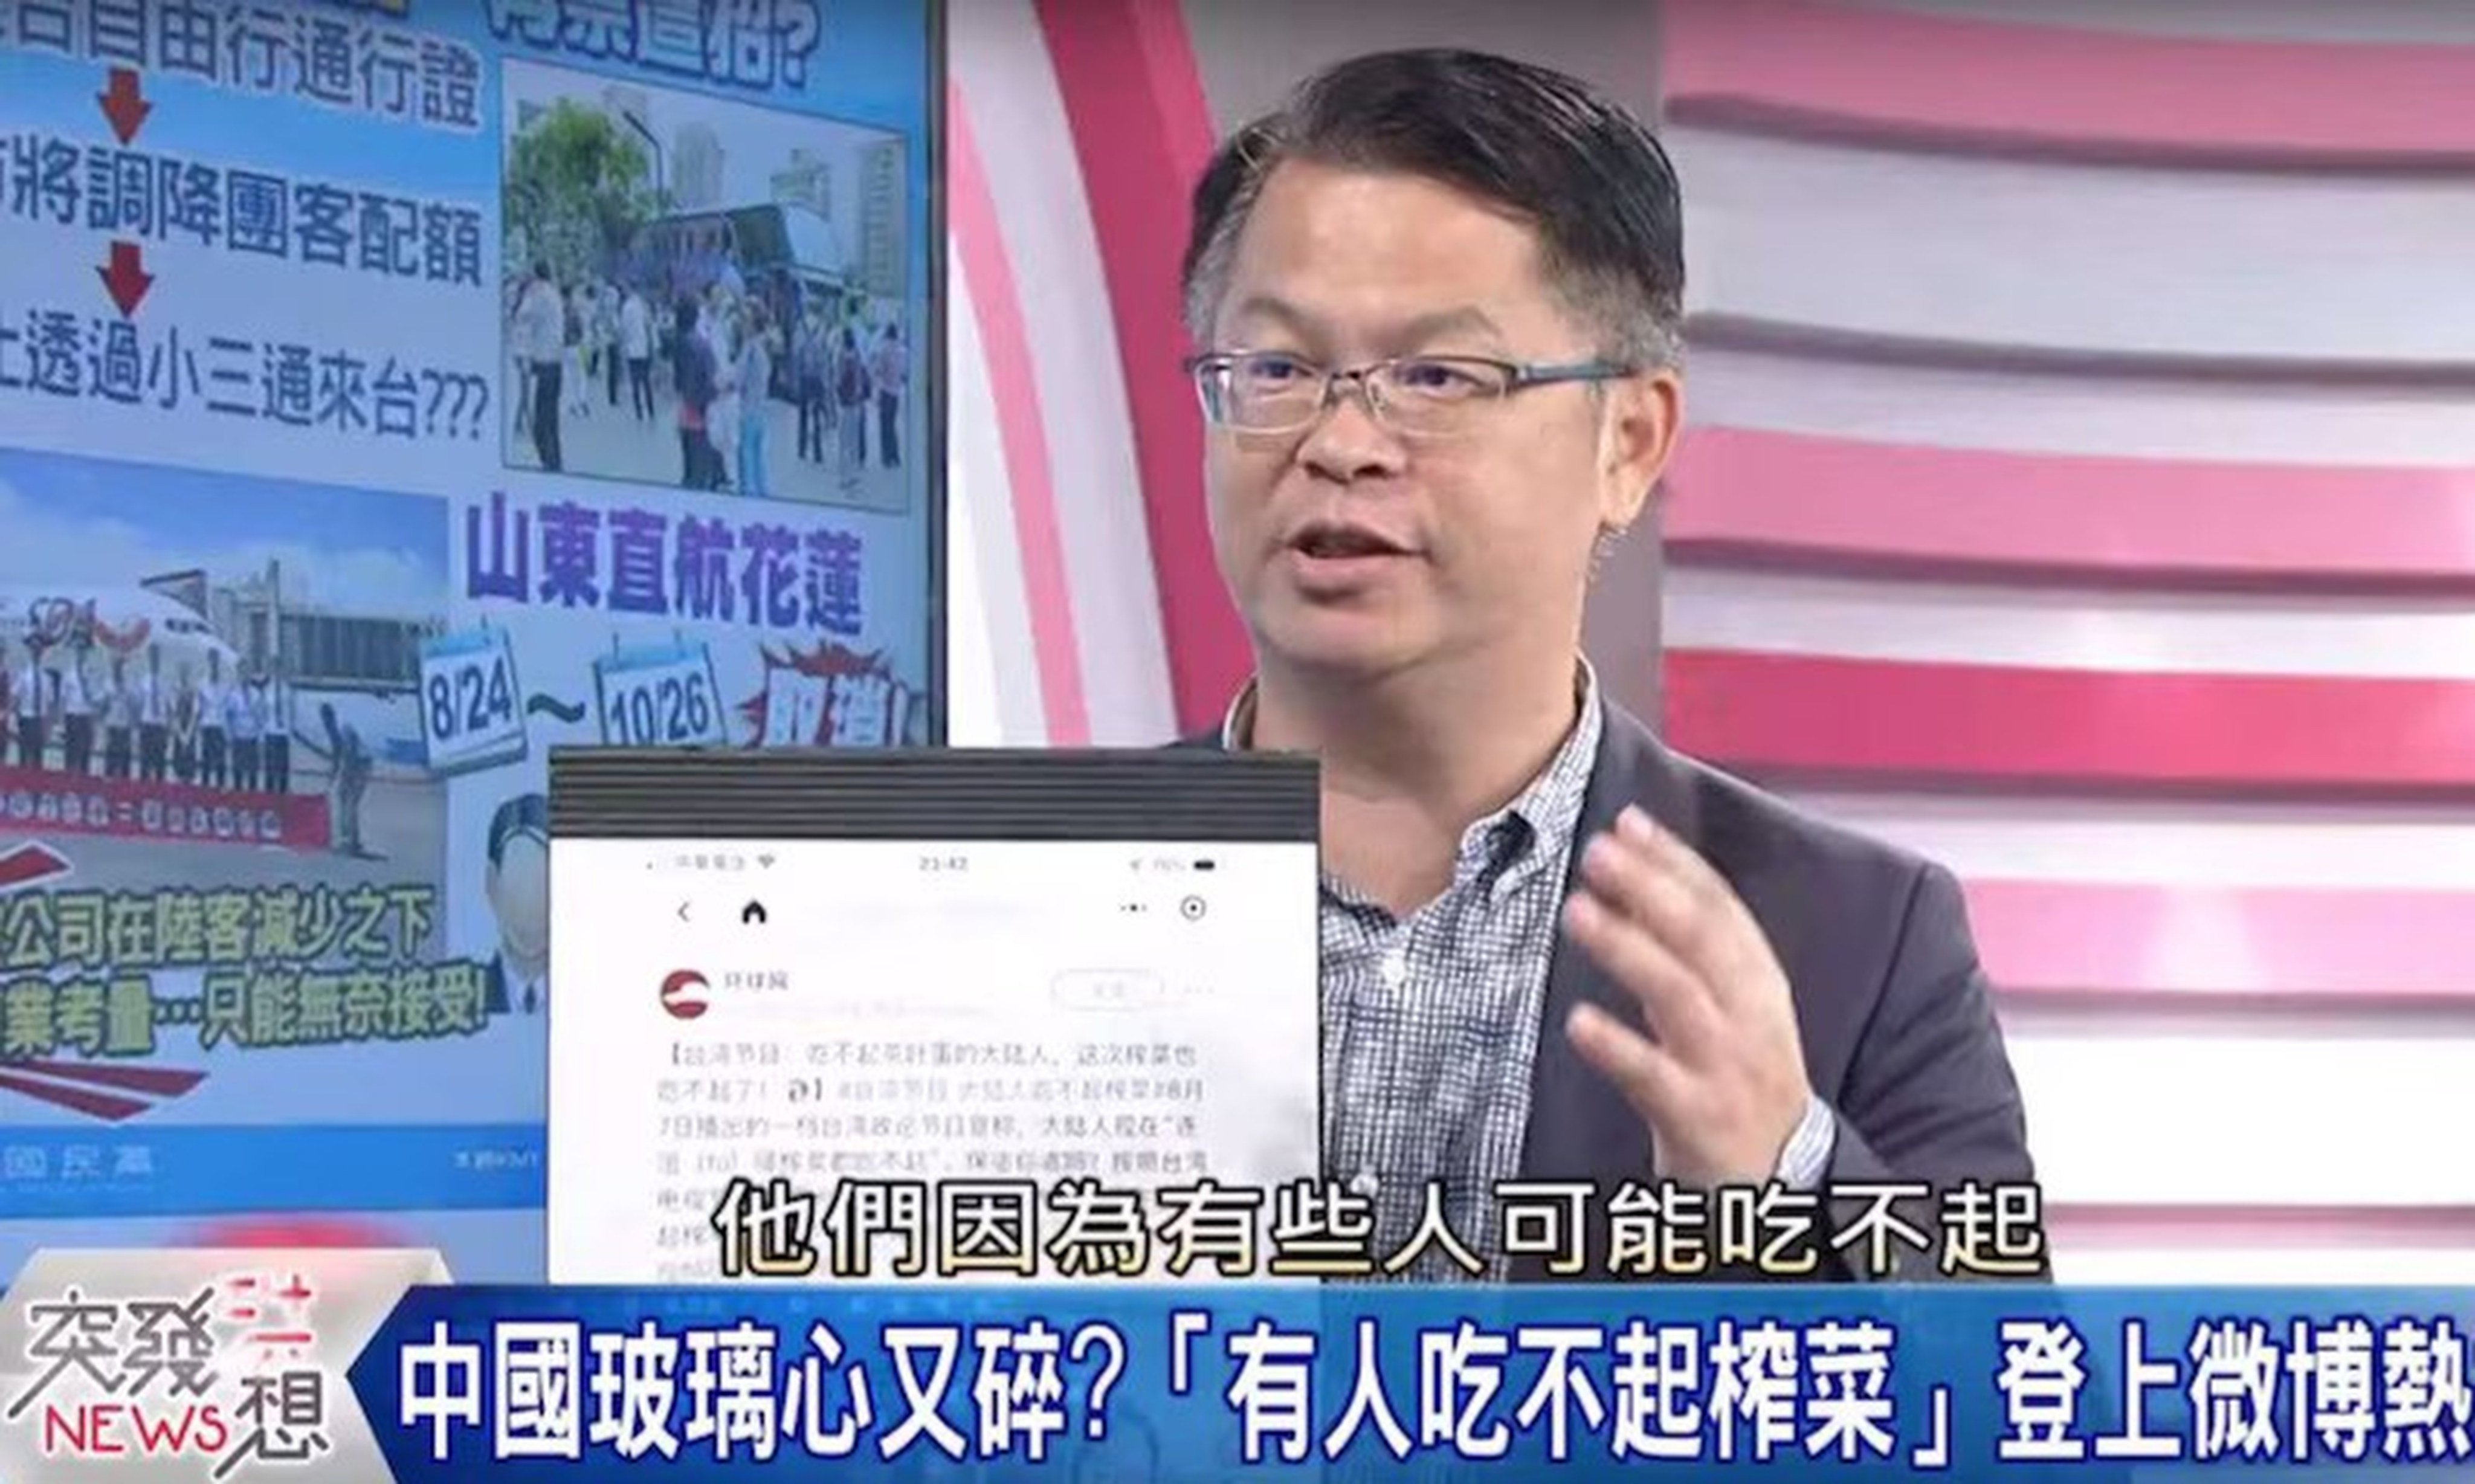 Commentator Edward Huang is one of the Taiwanese media figures targeted by Beijing’s latest “punitive measures”. Huang previously stirred controversy for reportedly saying that people in mainland China could not afford pickled vegetables. Photo: SCMP